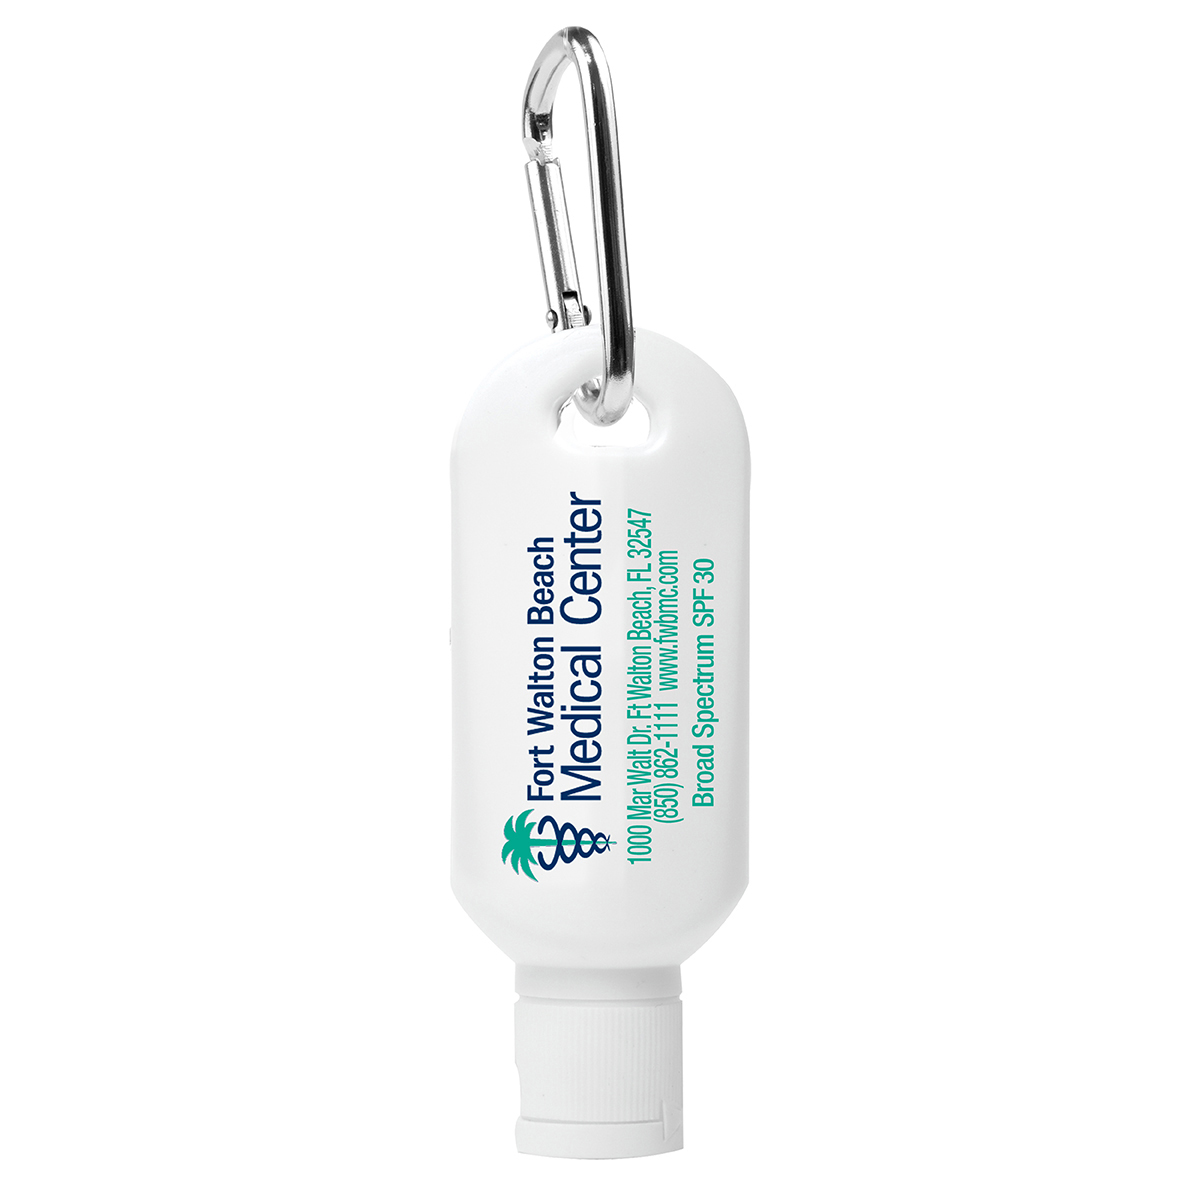 "SUNNY DAY" 1 oz Broad Spectrum SPF 30 Sunscreen Lotion in Solid White Carabiner Tottle (Spot Color)